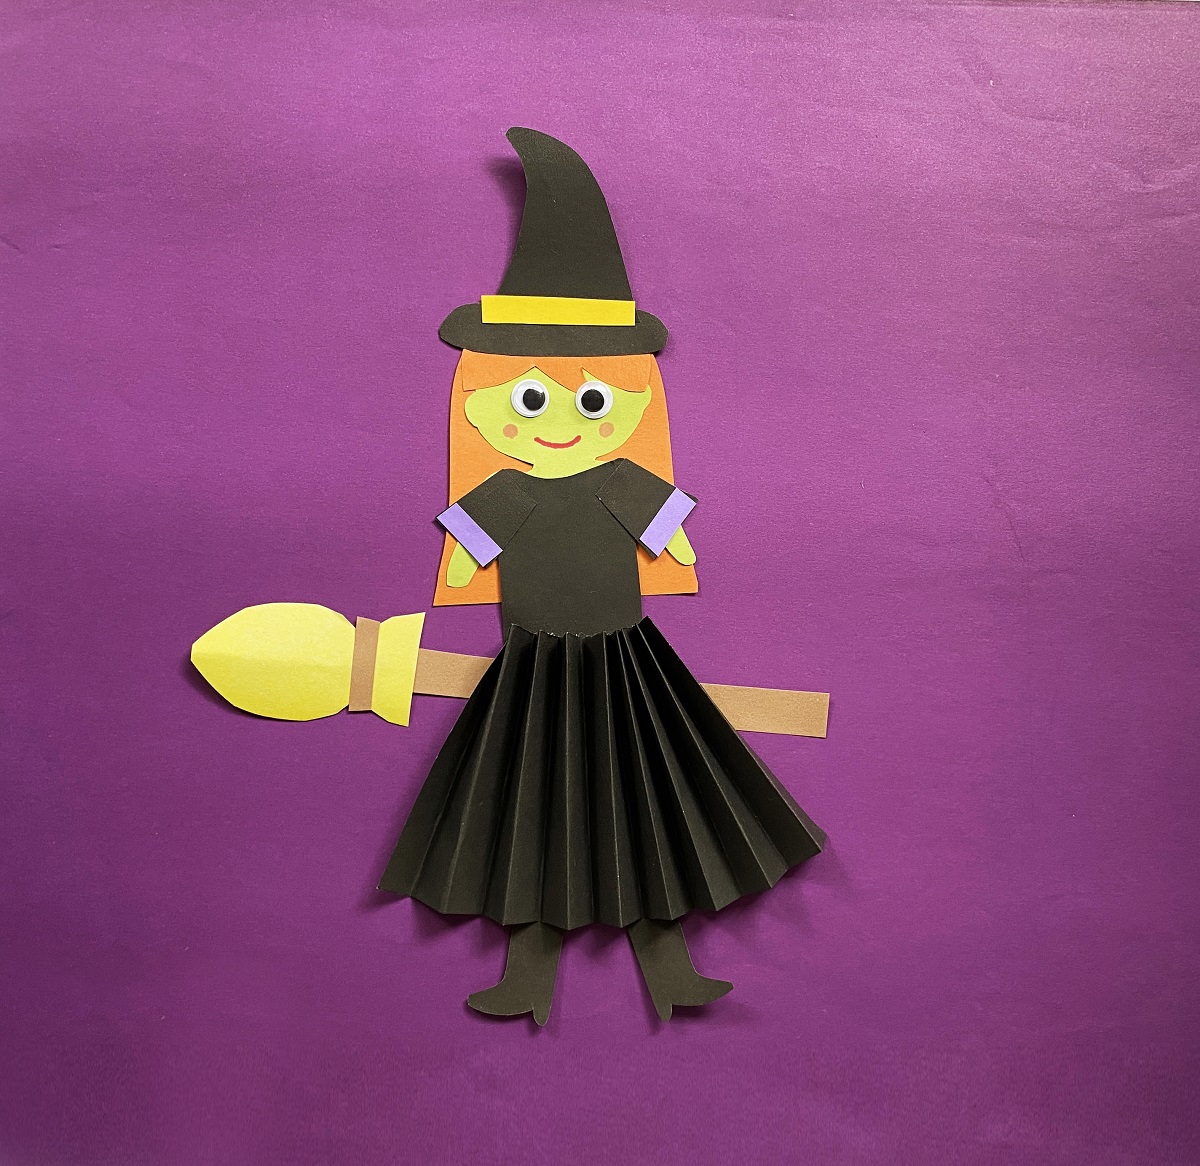 witch artwork for kids